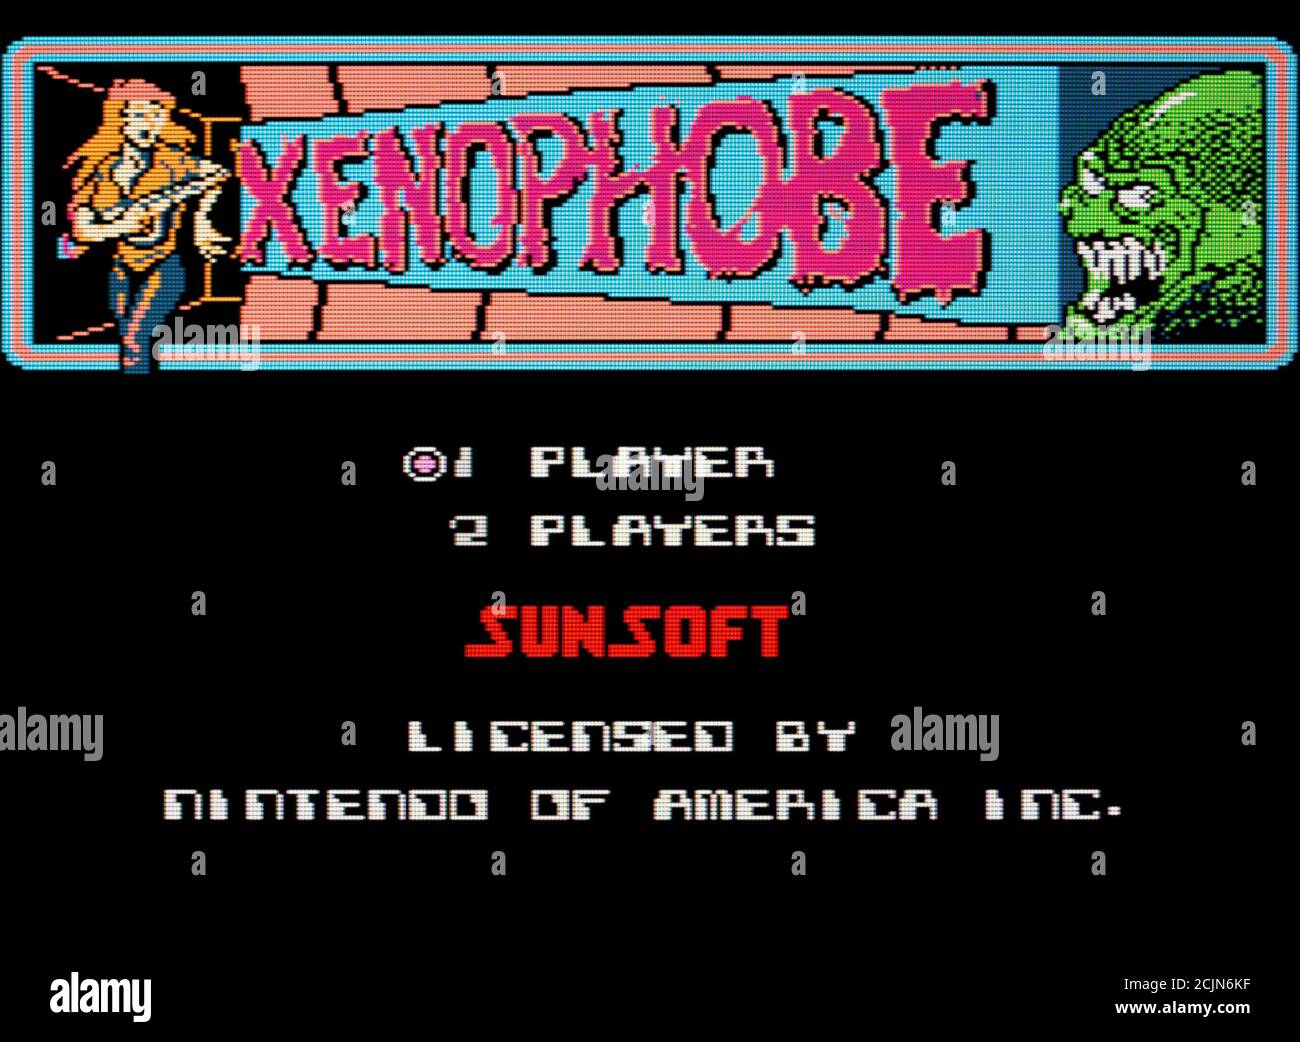 Xenophobe - Nintendo Entertainment System - NES Videogame - Editorial use only Stock Photo